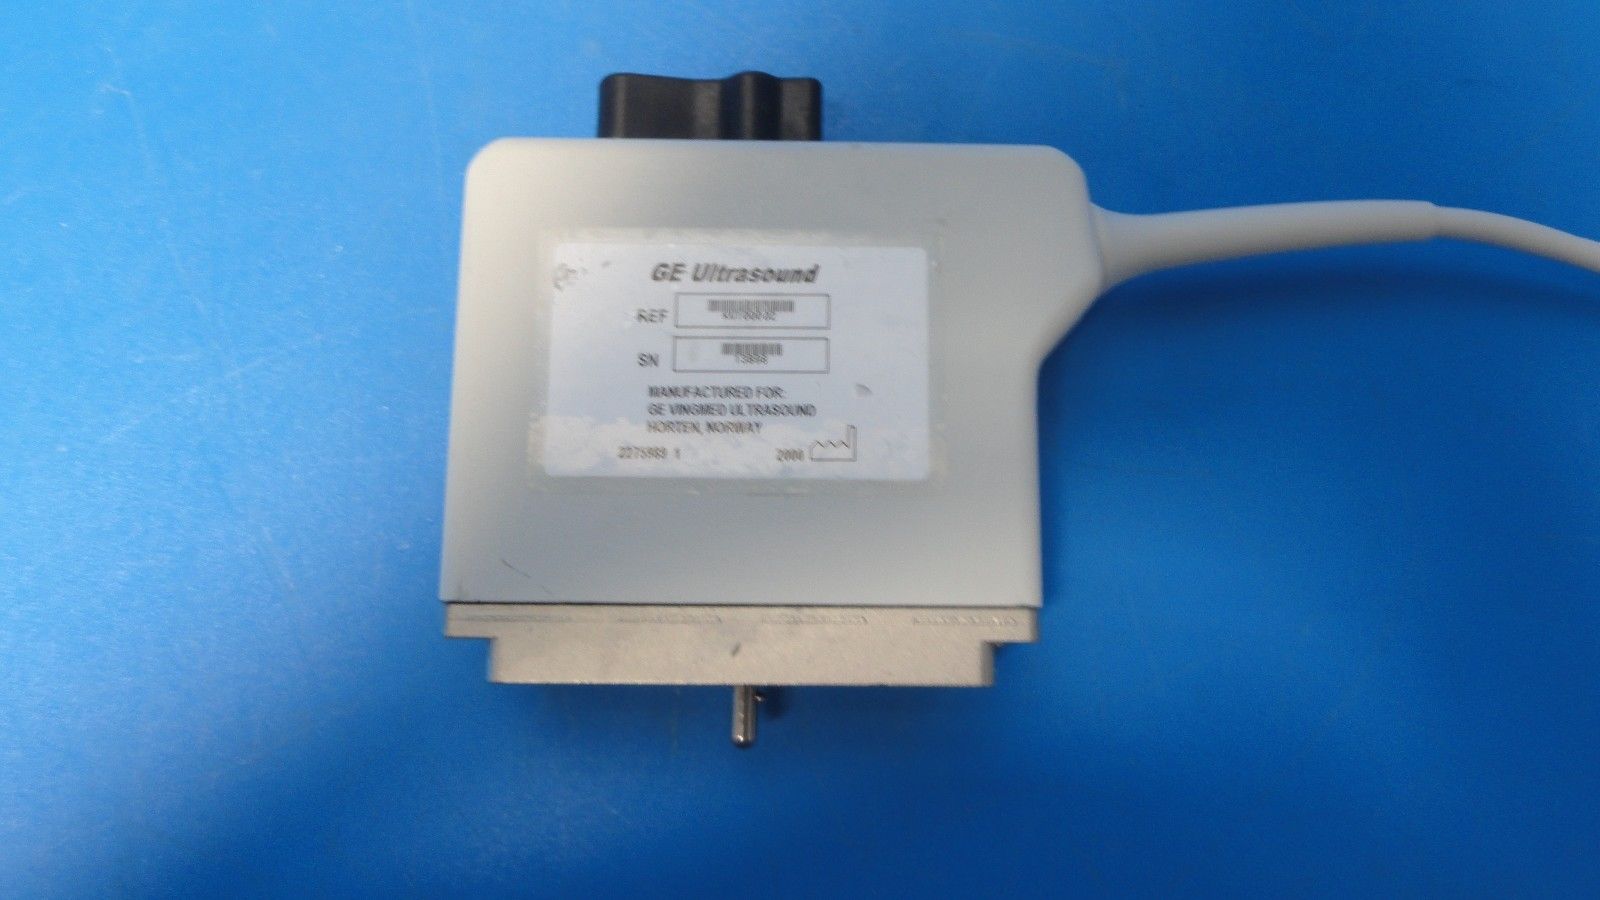 GE Vingmed KW100002 10MHZ FPA Phased Array PROBE for GE Vivid 5 & System 5(7170) DIAGNOSTIC ULTRASOUND MACHINES FOR SALE